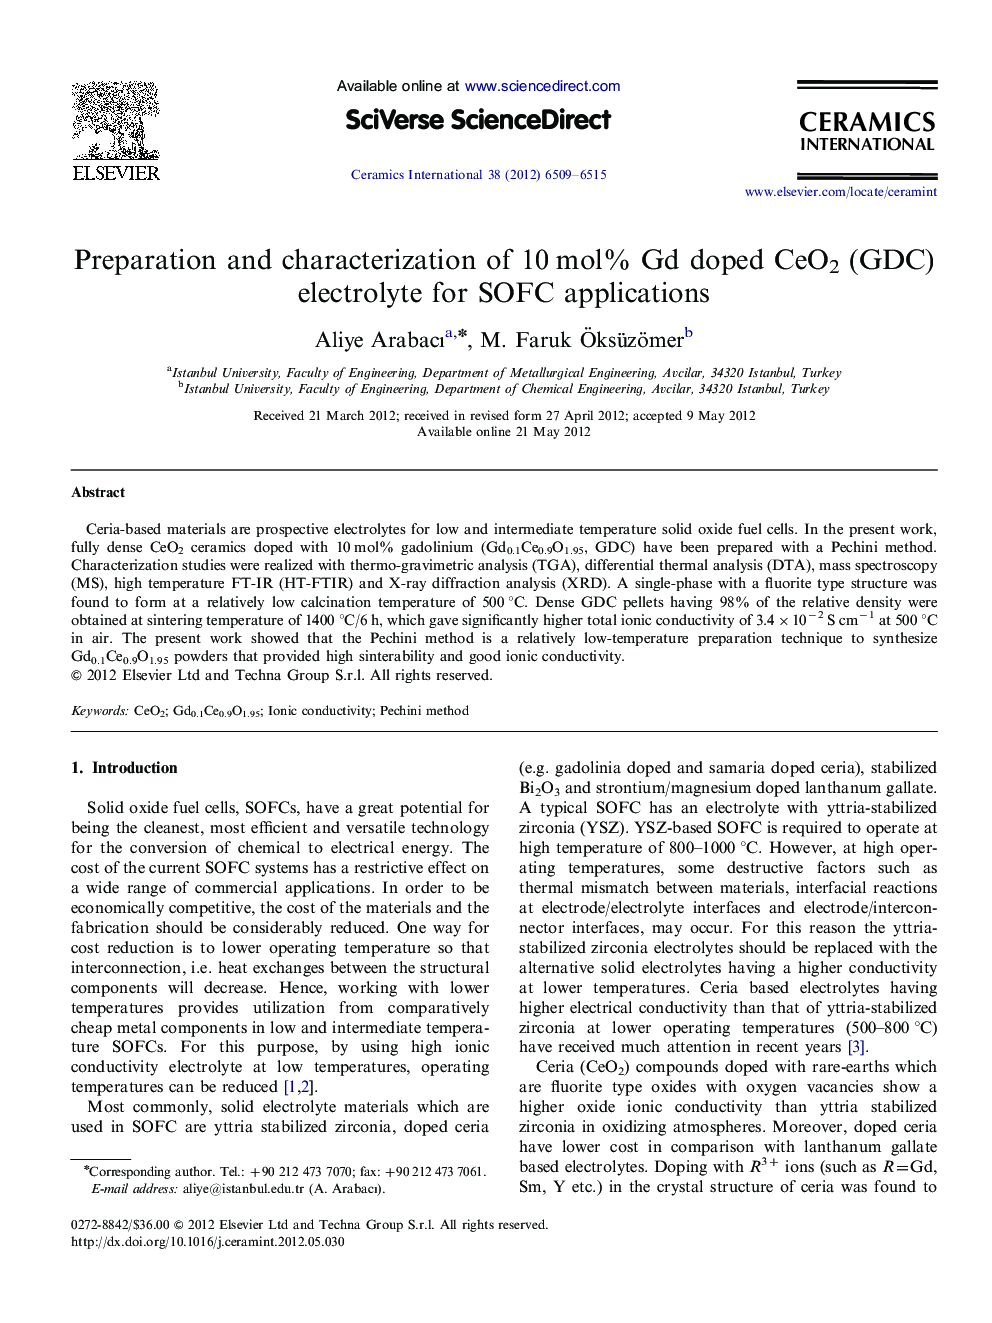 Preparation and characterization of 10 mol% Gd doped CeO2 (GDC) electrolyte for SOFC applications